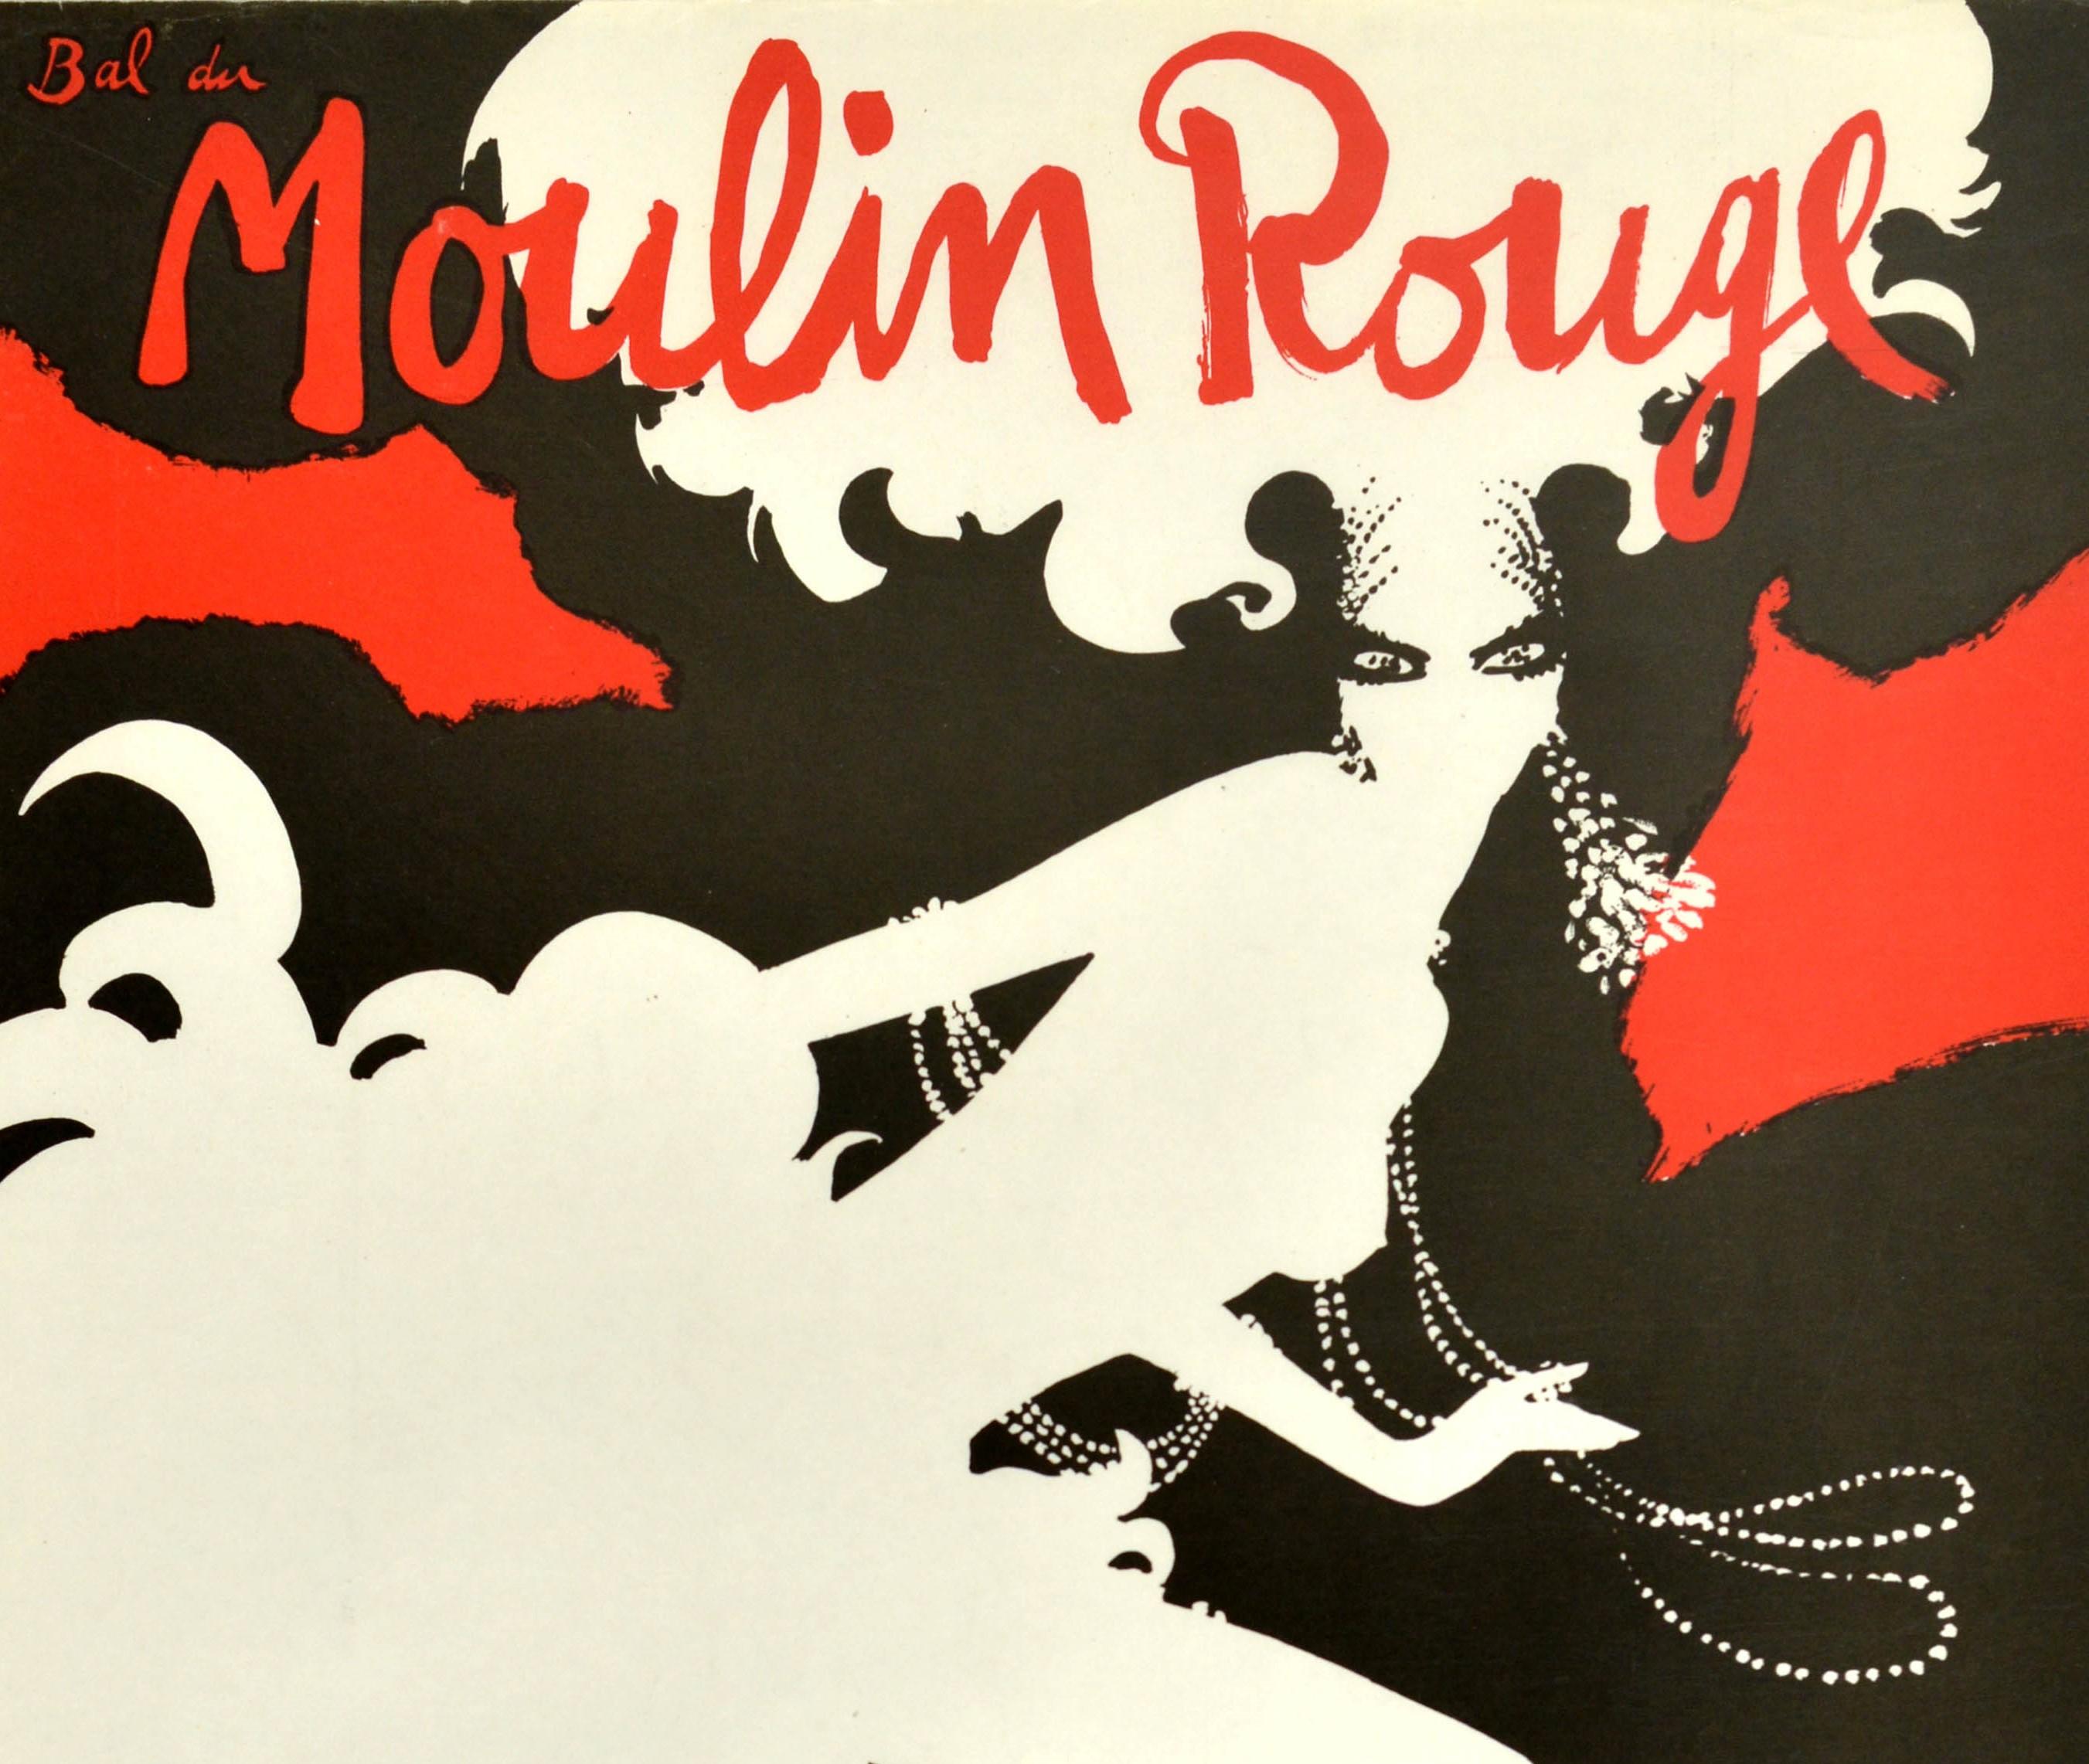 Original vintage advertising poster for the Frenzy cabaret show performed by the Doriss Girls at the Moulin Rouge in Paris the most famous French Cancan in the world / Bal du Moulin Rouge Frenesie les 40 Doriss Girls les dauphins dans l'aquarium